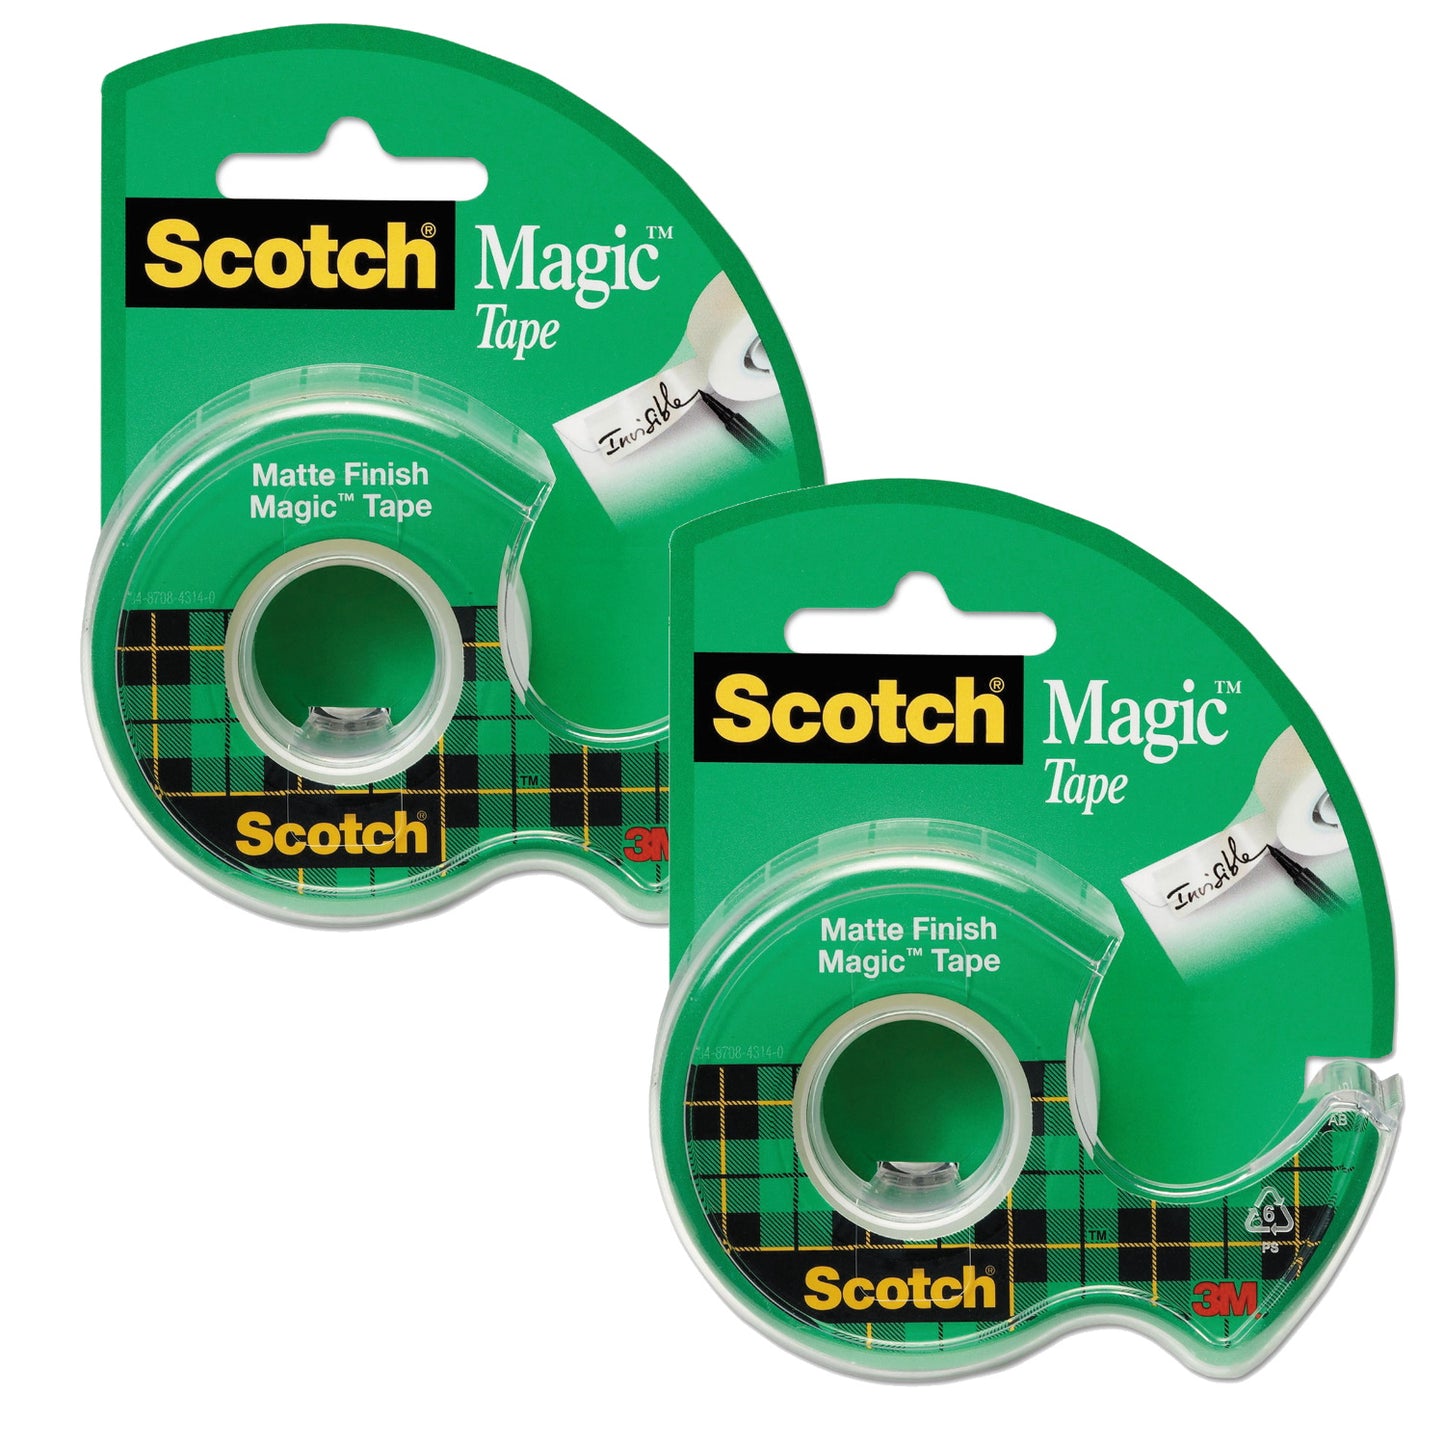 2 pcs Scotch Magic Tape in Handheld Dispenser, 1" Core, 0.75" x 25 ft, Clear Roll smoothly, Cuts Easily